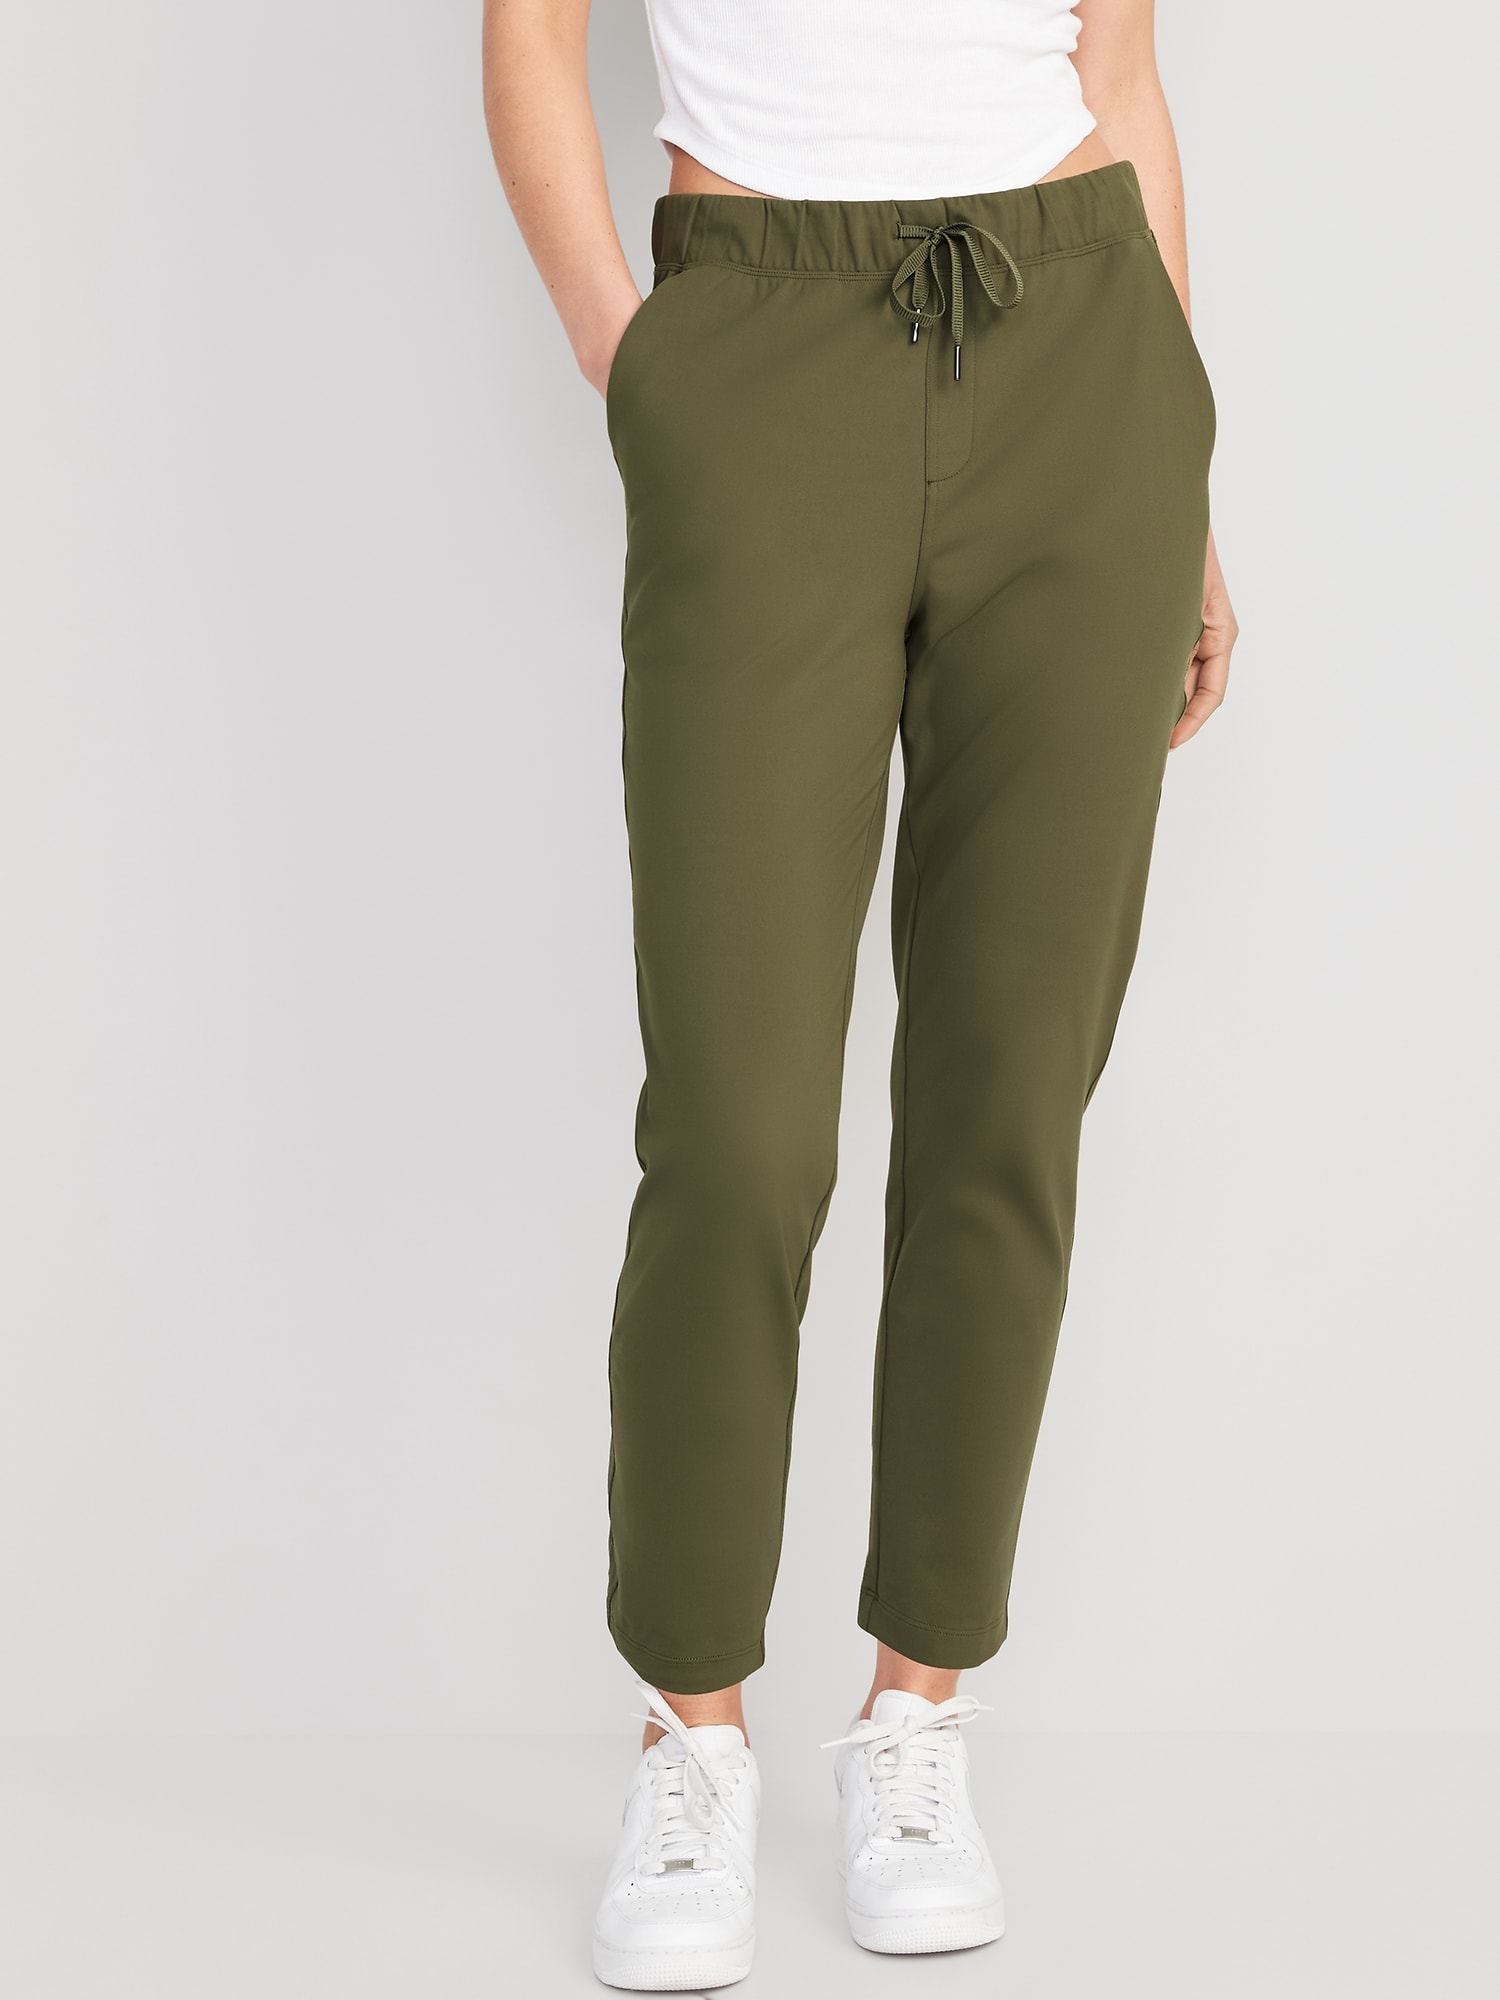 Old Navy Women's Pants On Sale Up To 90% Off Retail